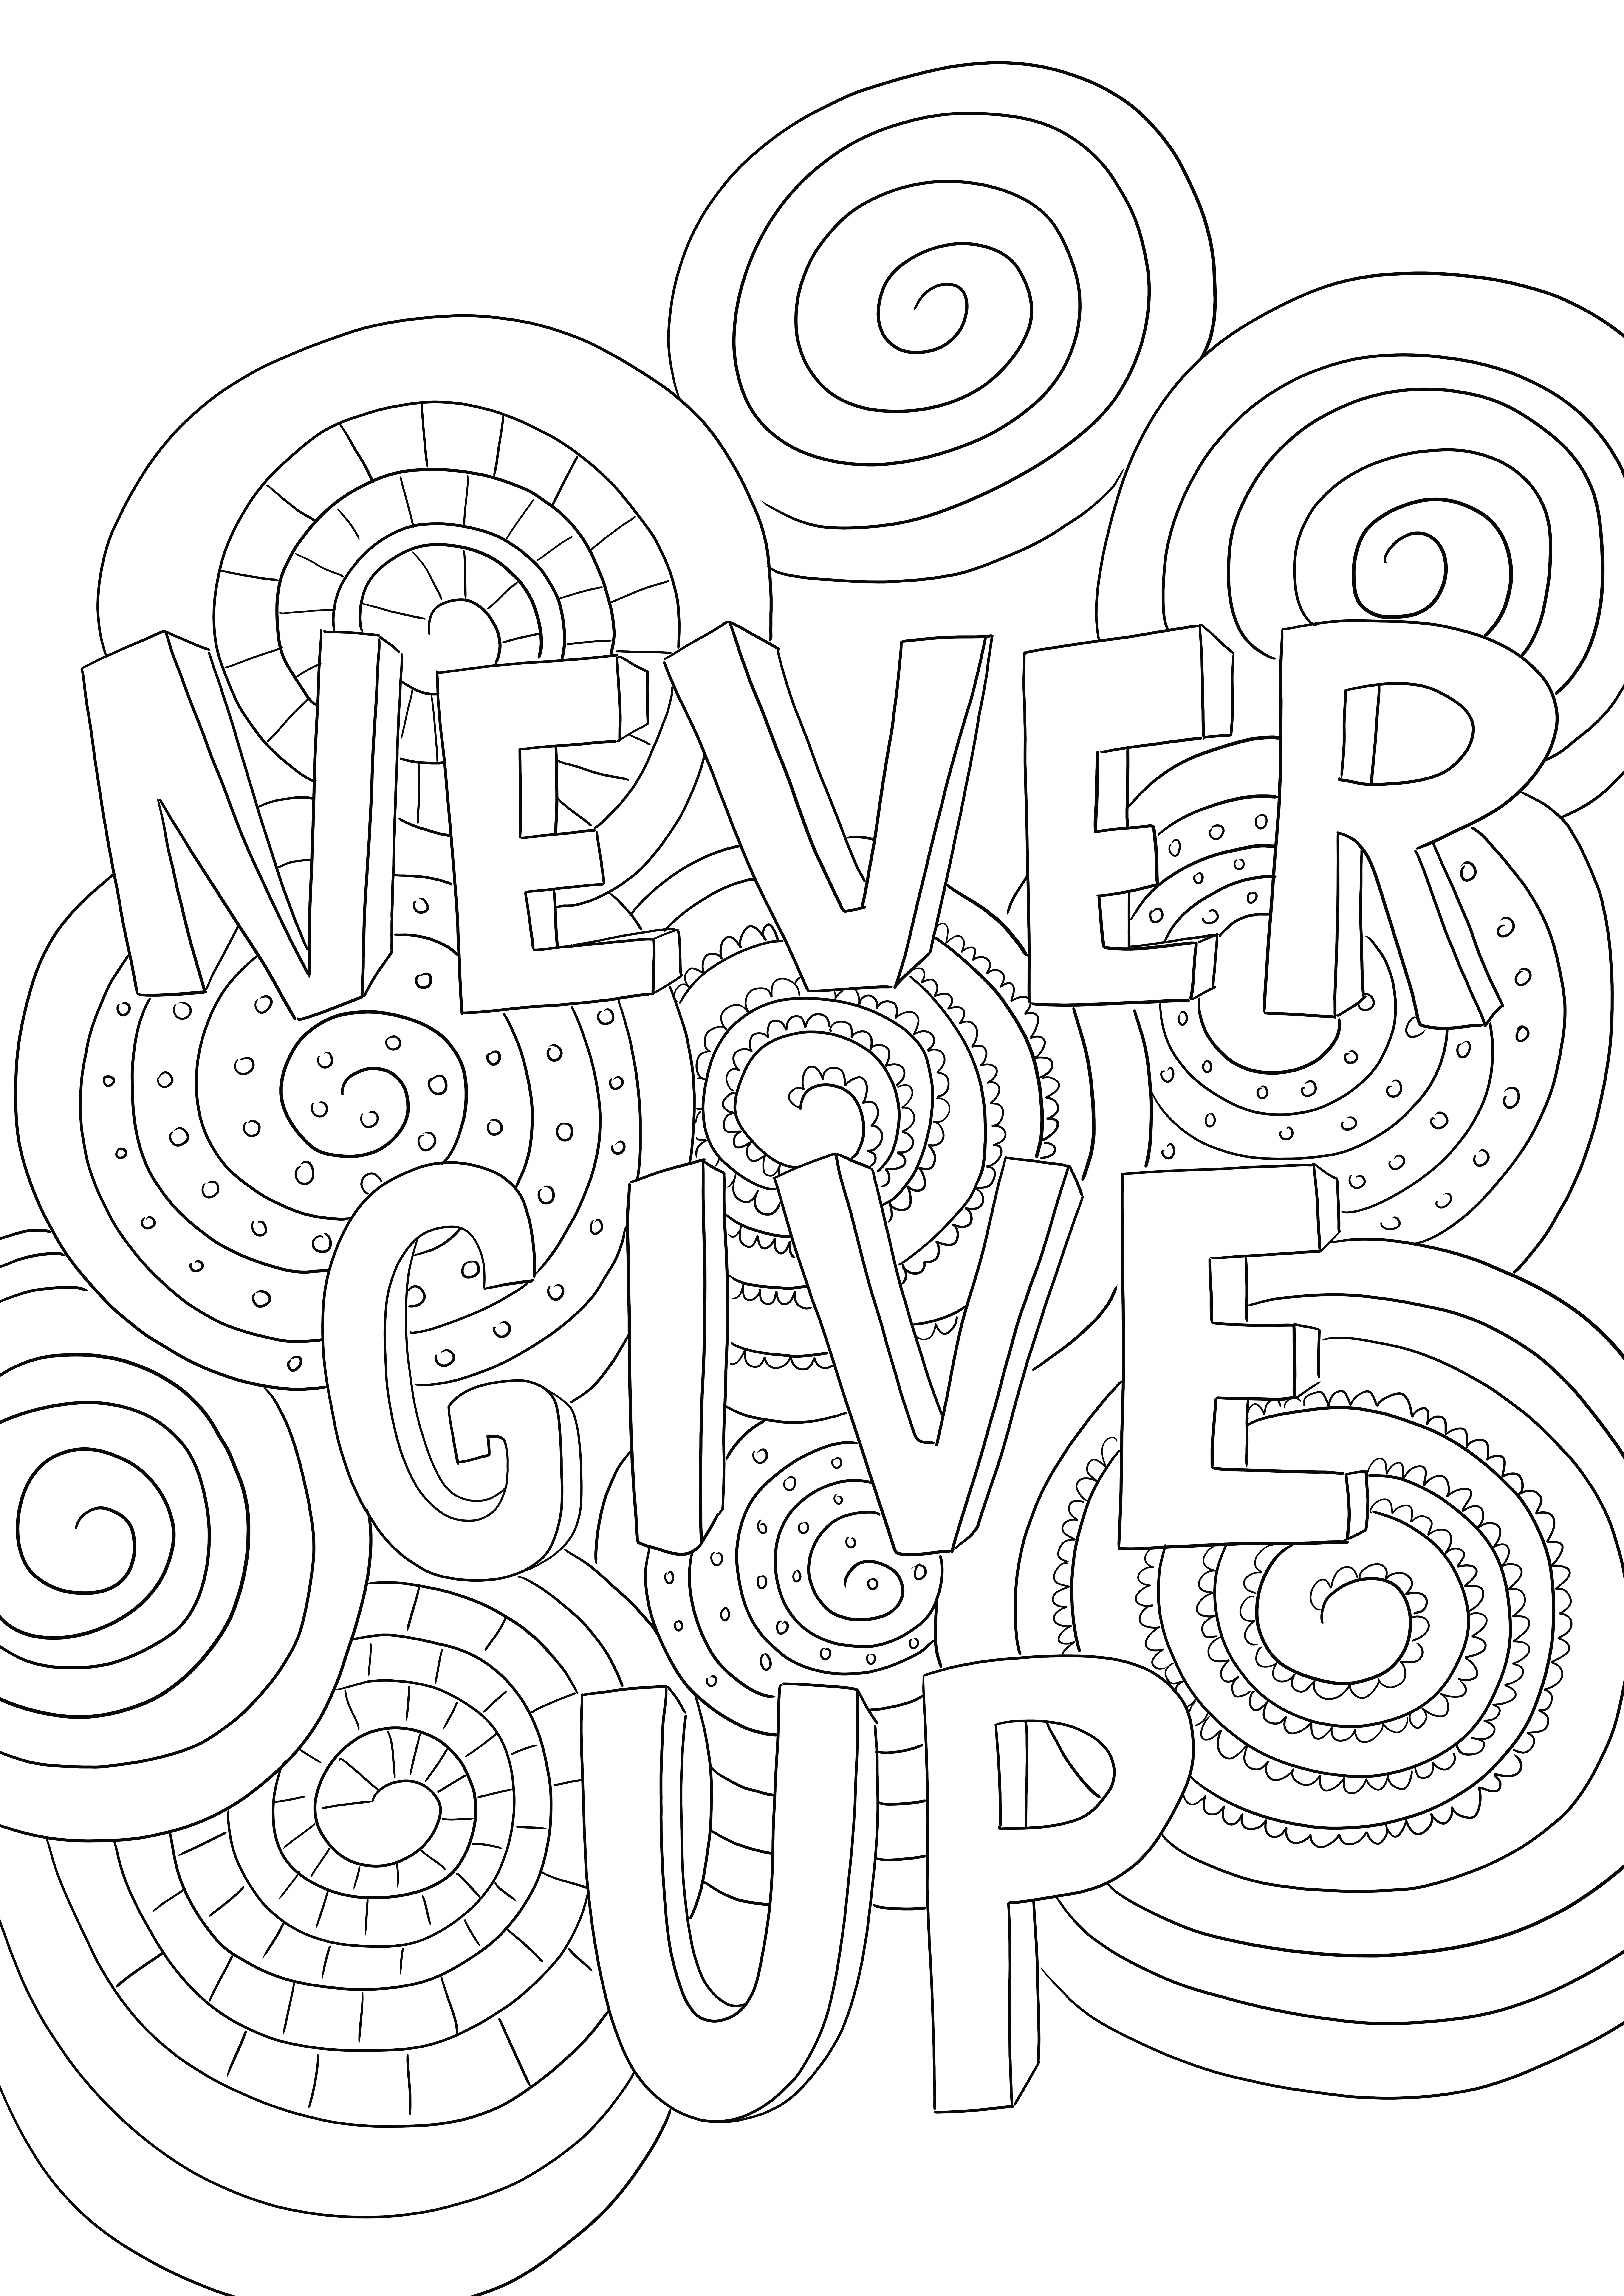 Never Give Up coloring image from the doodle art free to print or save for later